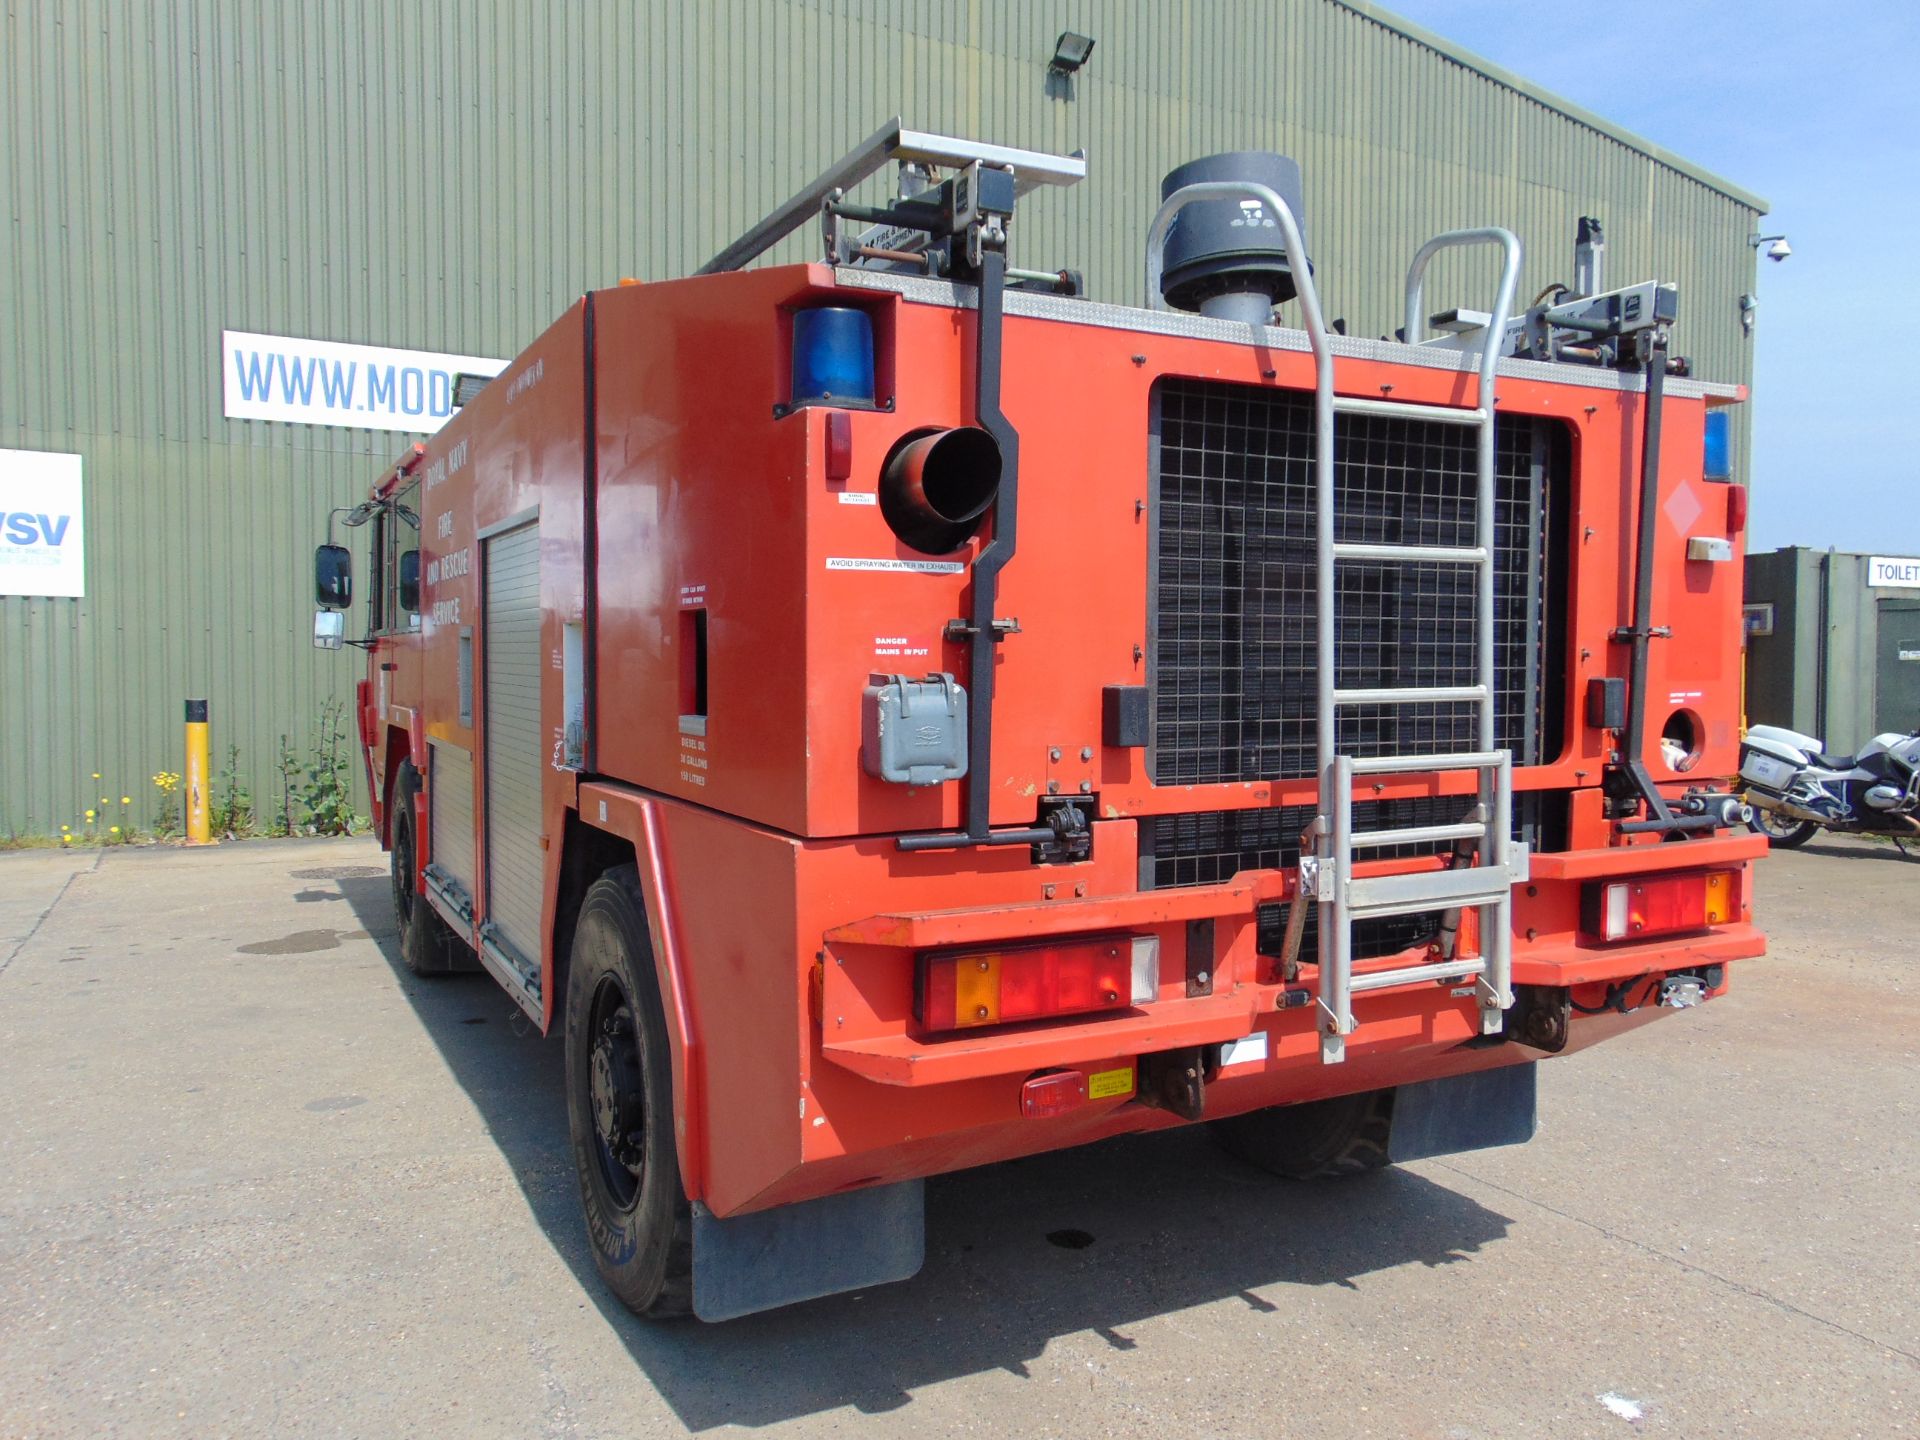 Unipower 4 x 4 Airport Fire Fighting Appliance - Rapid Intervention Vehicle - Image 14 of 73